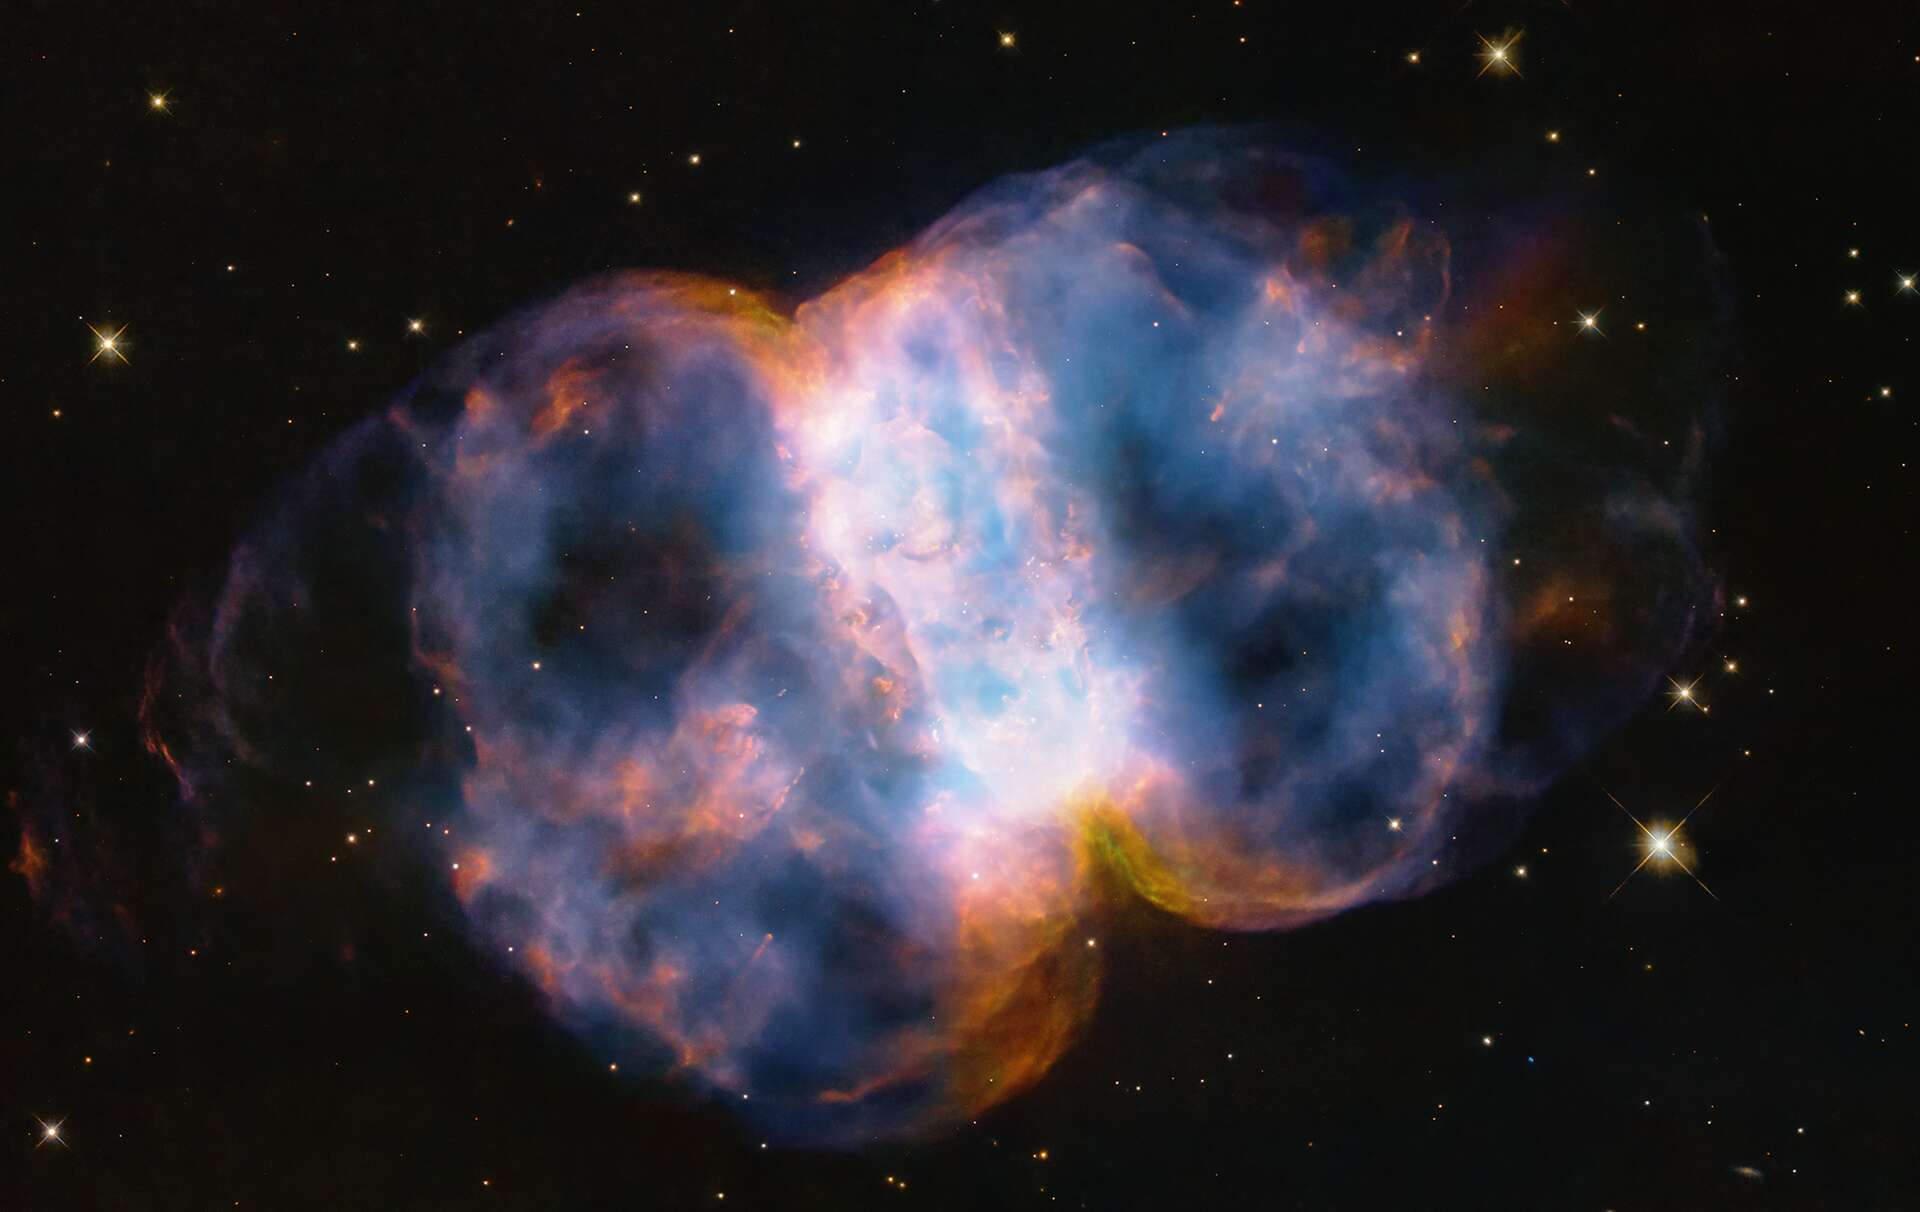 Hubble surprises us with an iconic new image for its 34th anniversary!